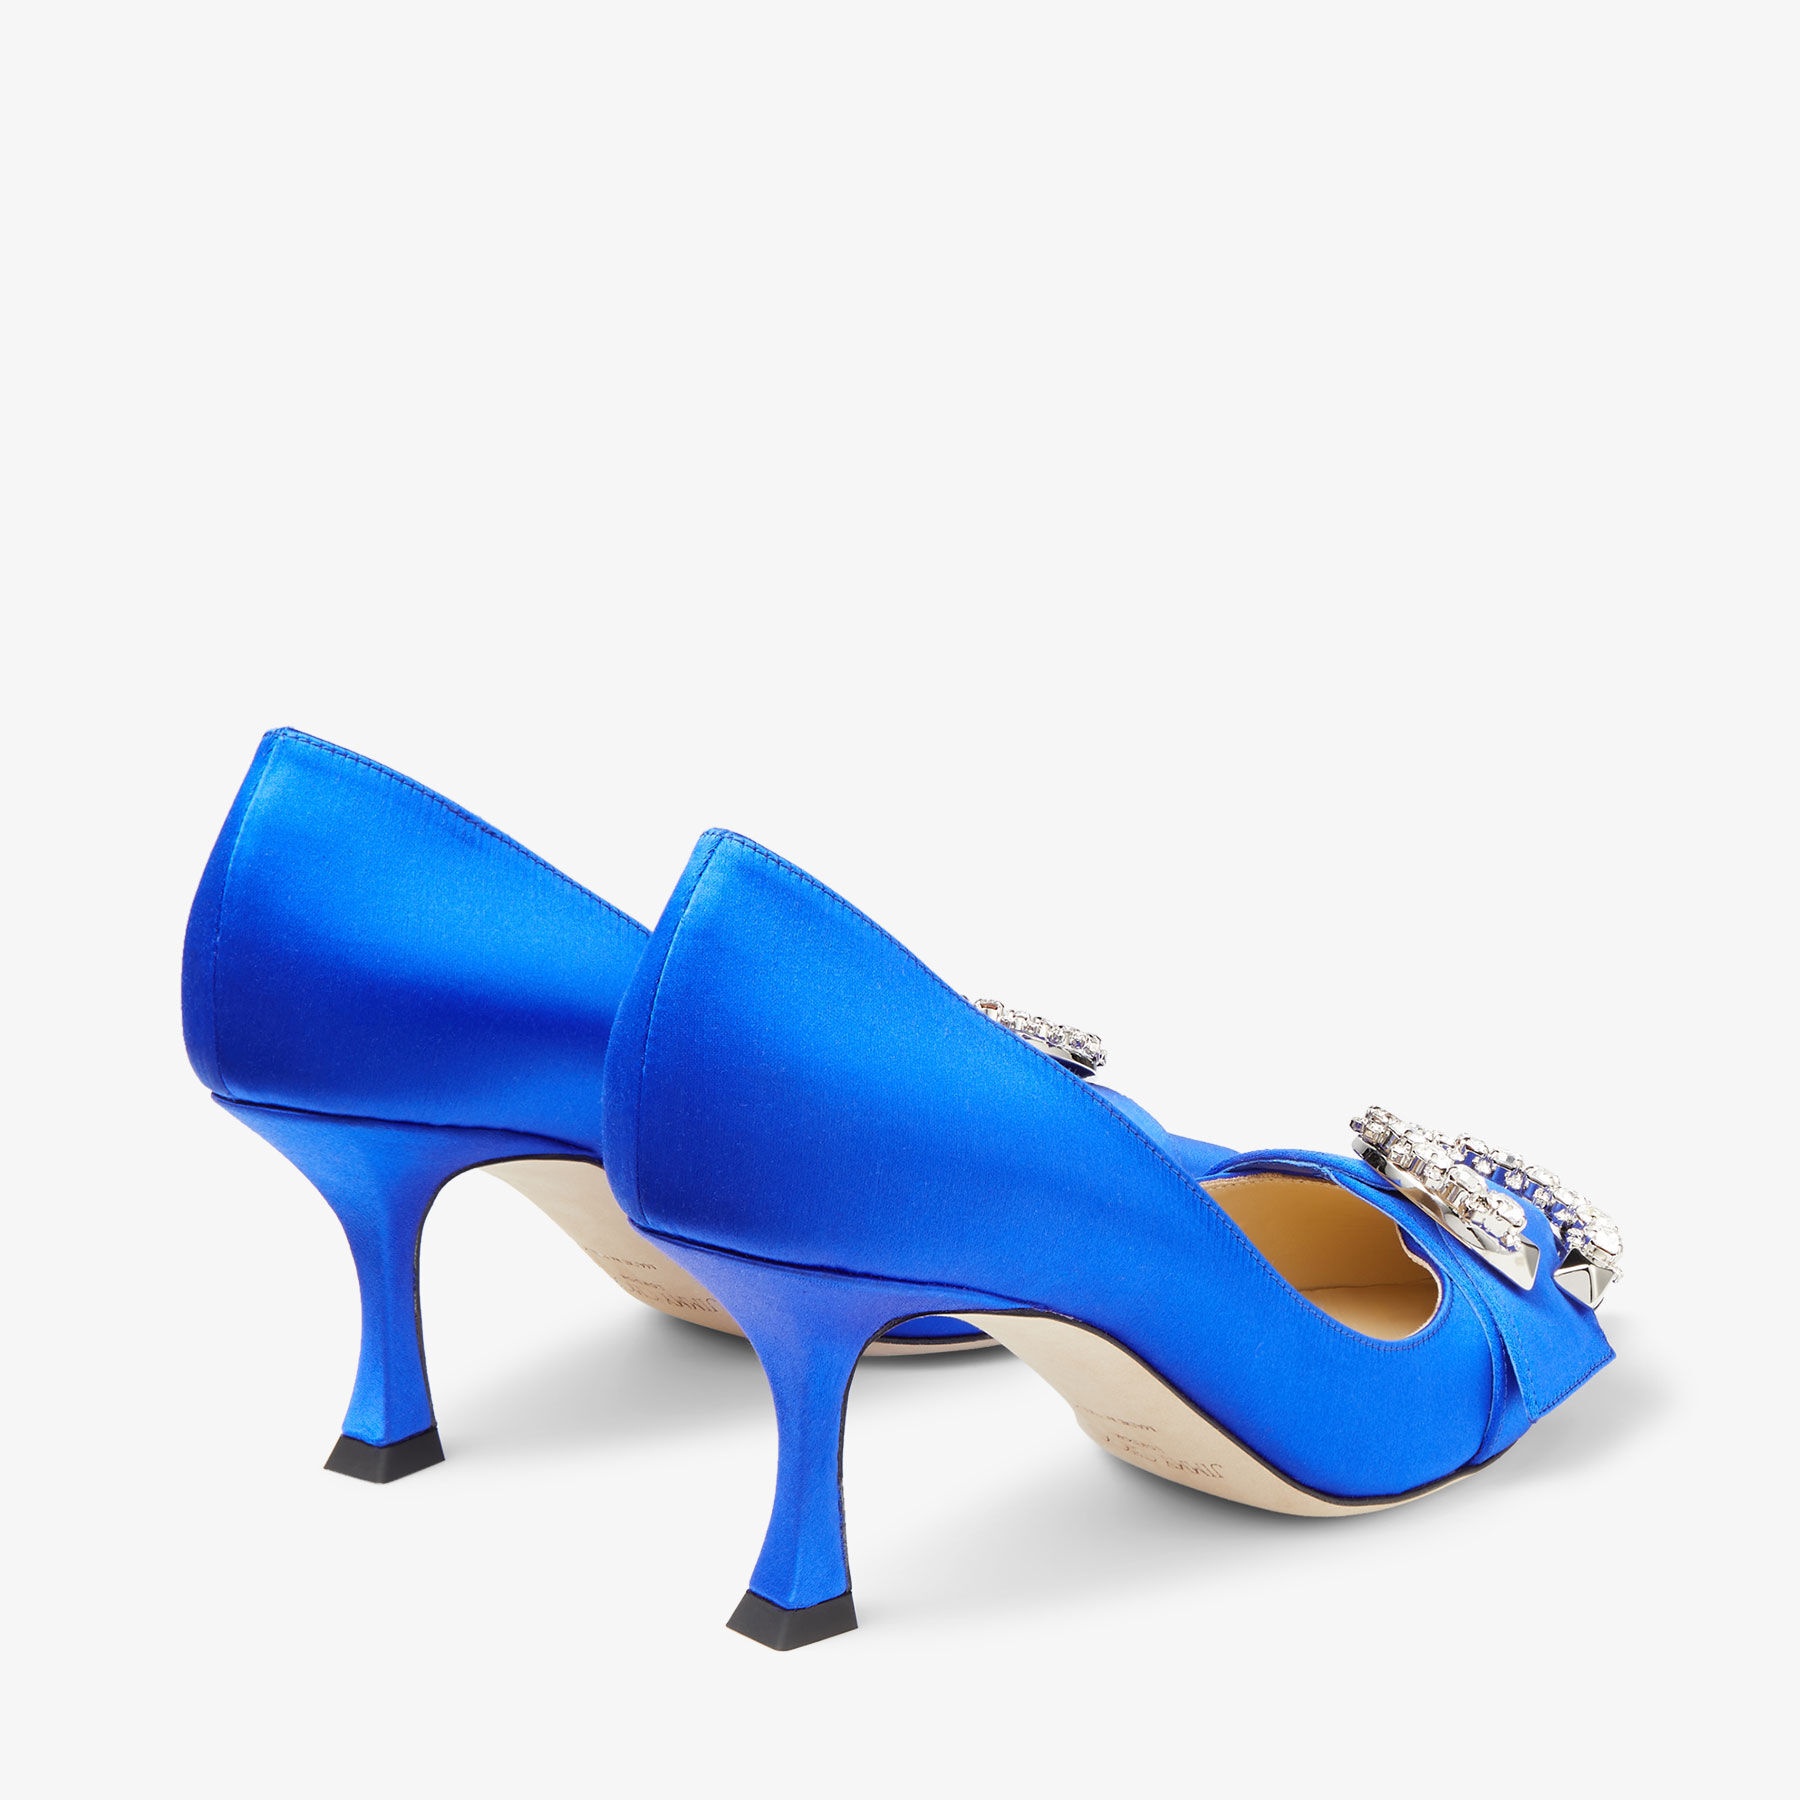 JIMMY CHOO Melva 70 Ultraviolet Satin Pointed-Toe Pumps with 